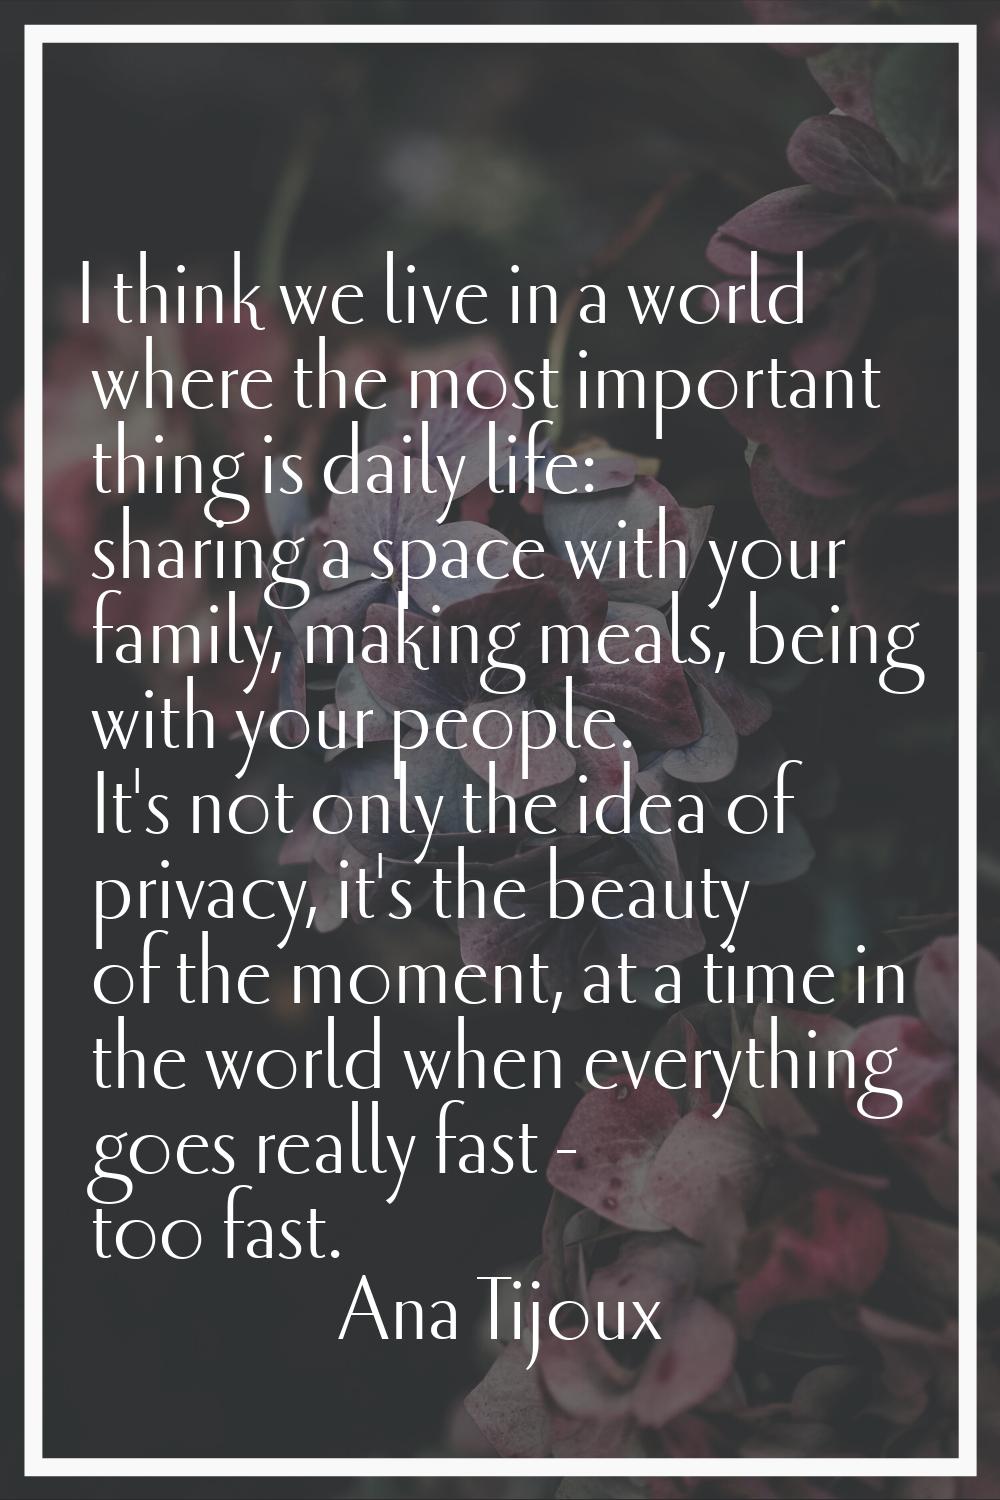 I think we live in a world where the most important thing is daily life: sharing a space with your 